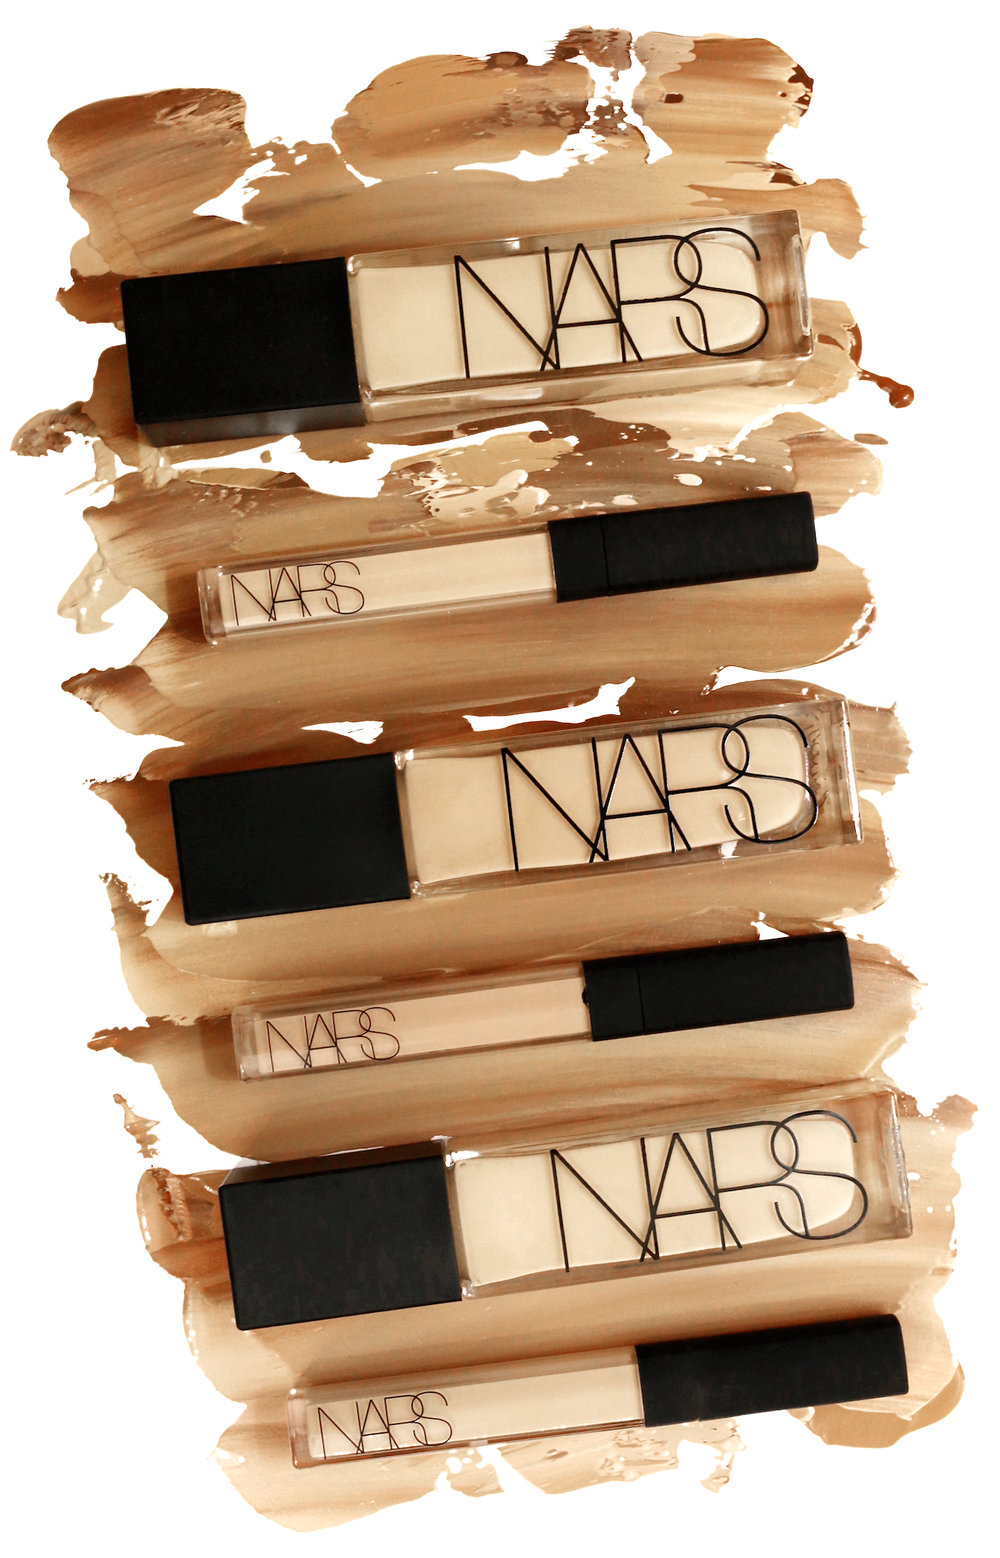 makes finding the right foundation shade a breeze! — WOAHSTYLE